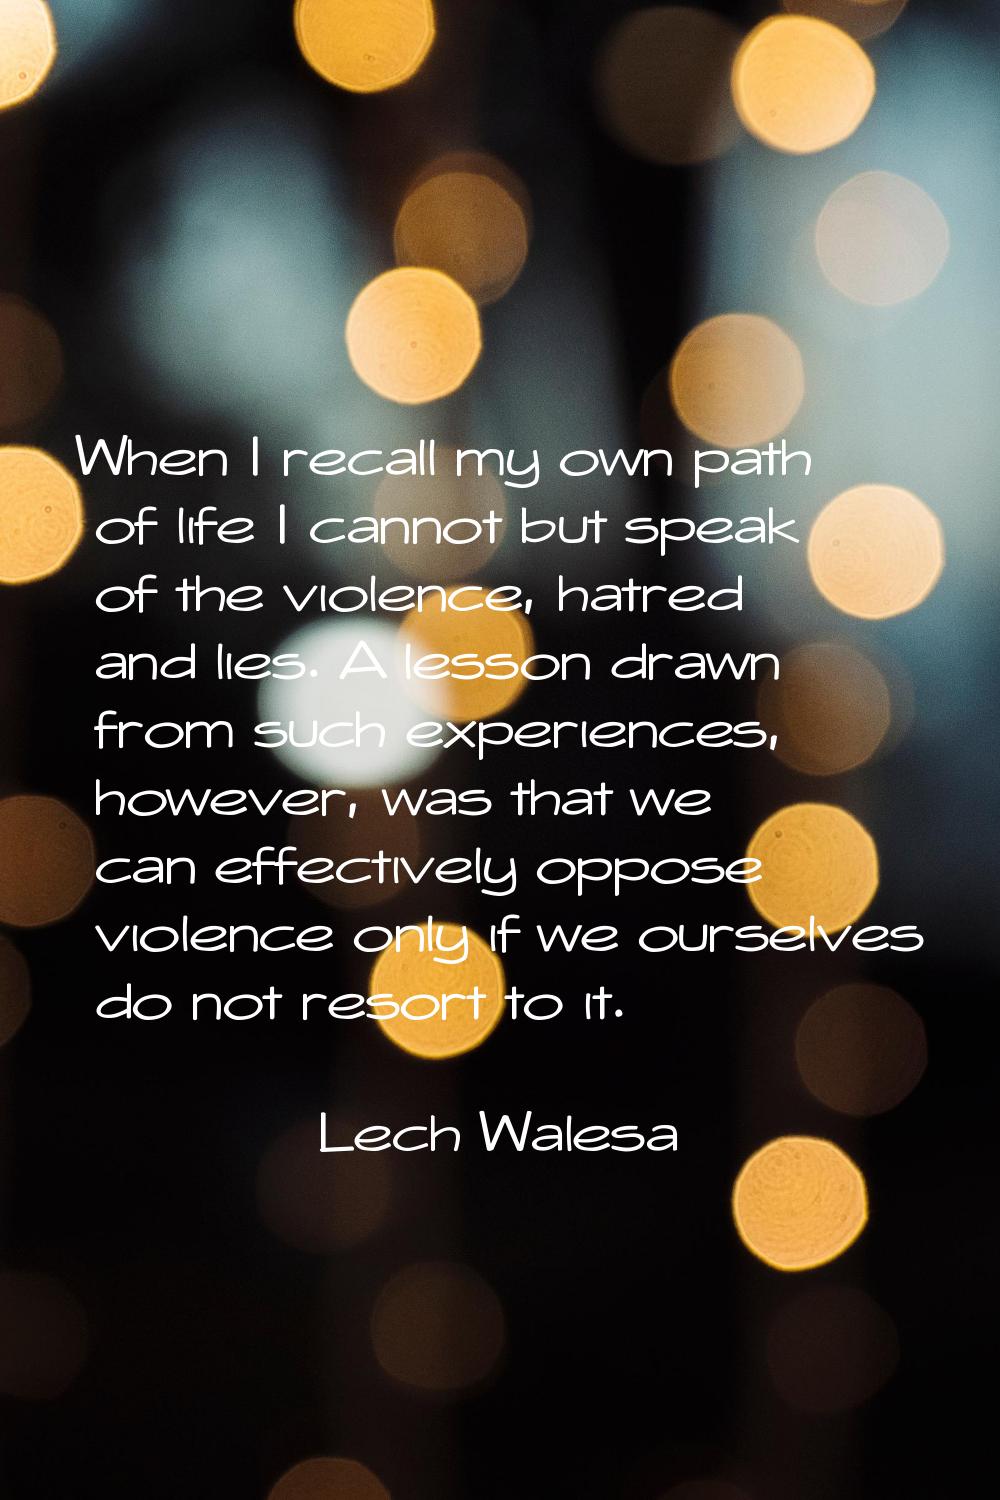 When I recall my own path of life I cannot but speak of the violence, hatred and lies. A lesson dra